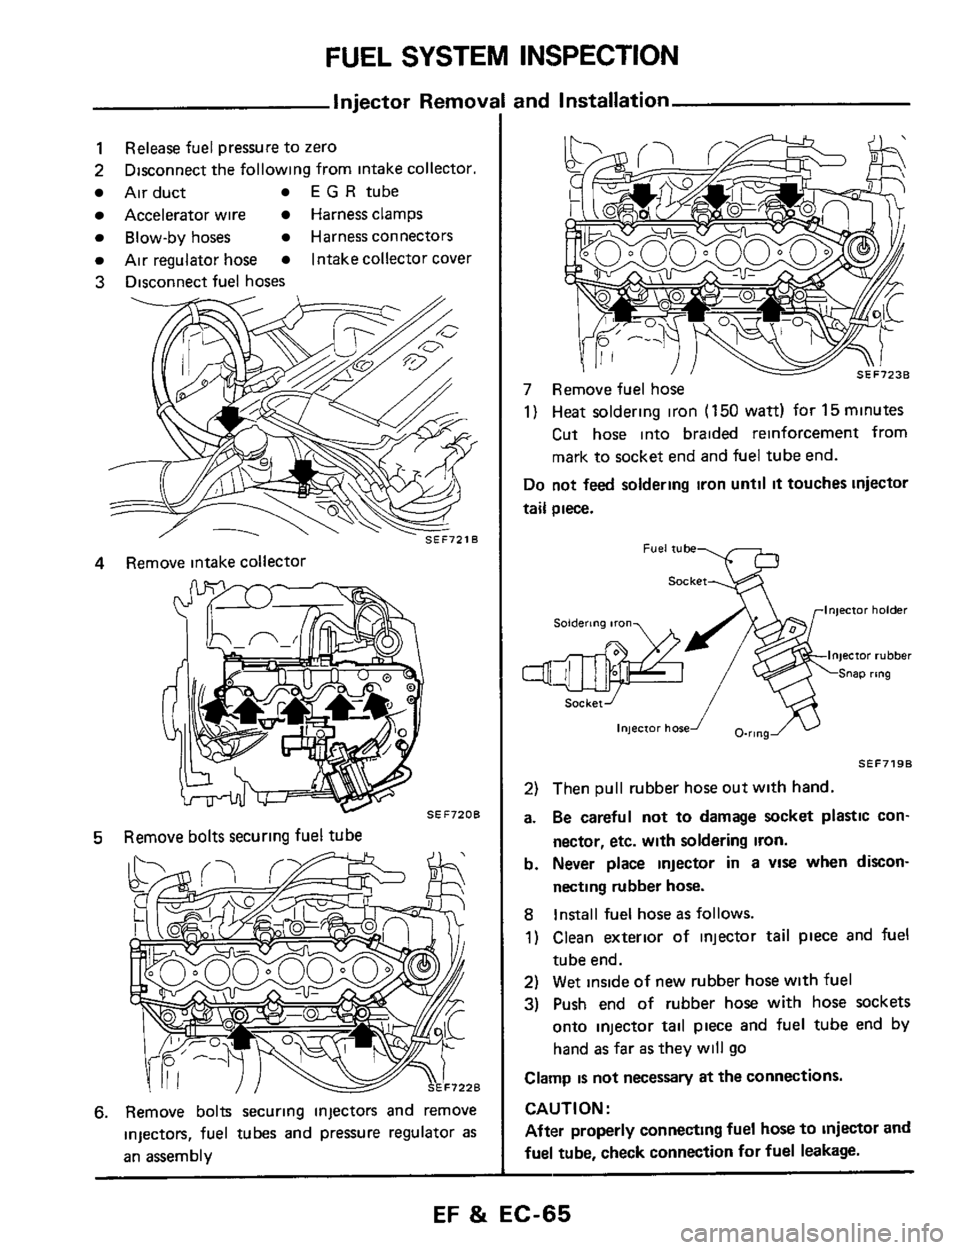 NISSAN 300ZX 1984 Z31 Engine Fuel And Emission Control System Repair Manual FUEL SYSTEM INSPECTION 
Injector Removi 
1 
2 
Air duct E G R tube 
Accelerator  wire Harness clamps 
Blow-by hoses Harness connectors 
Air regulator  hose Intakecollector  cover 
3 Disconnect fuel ho